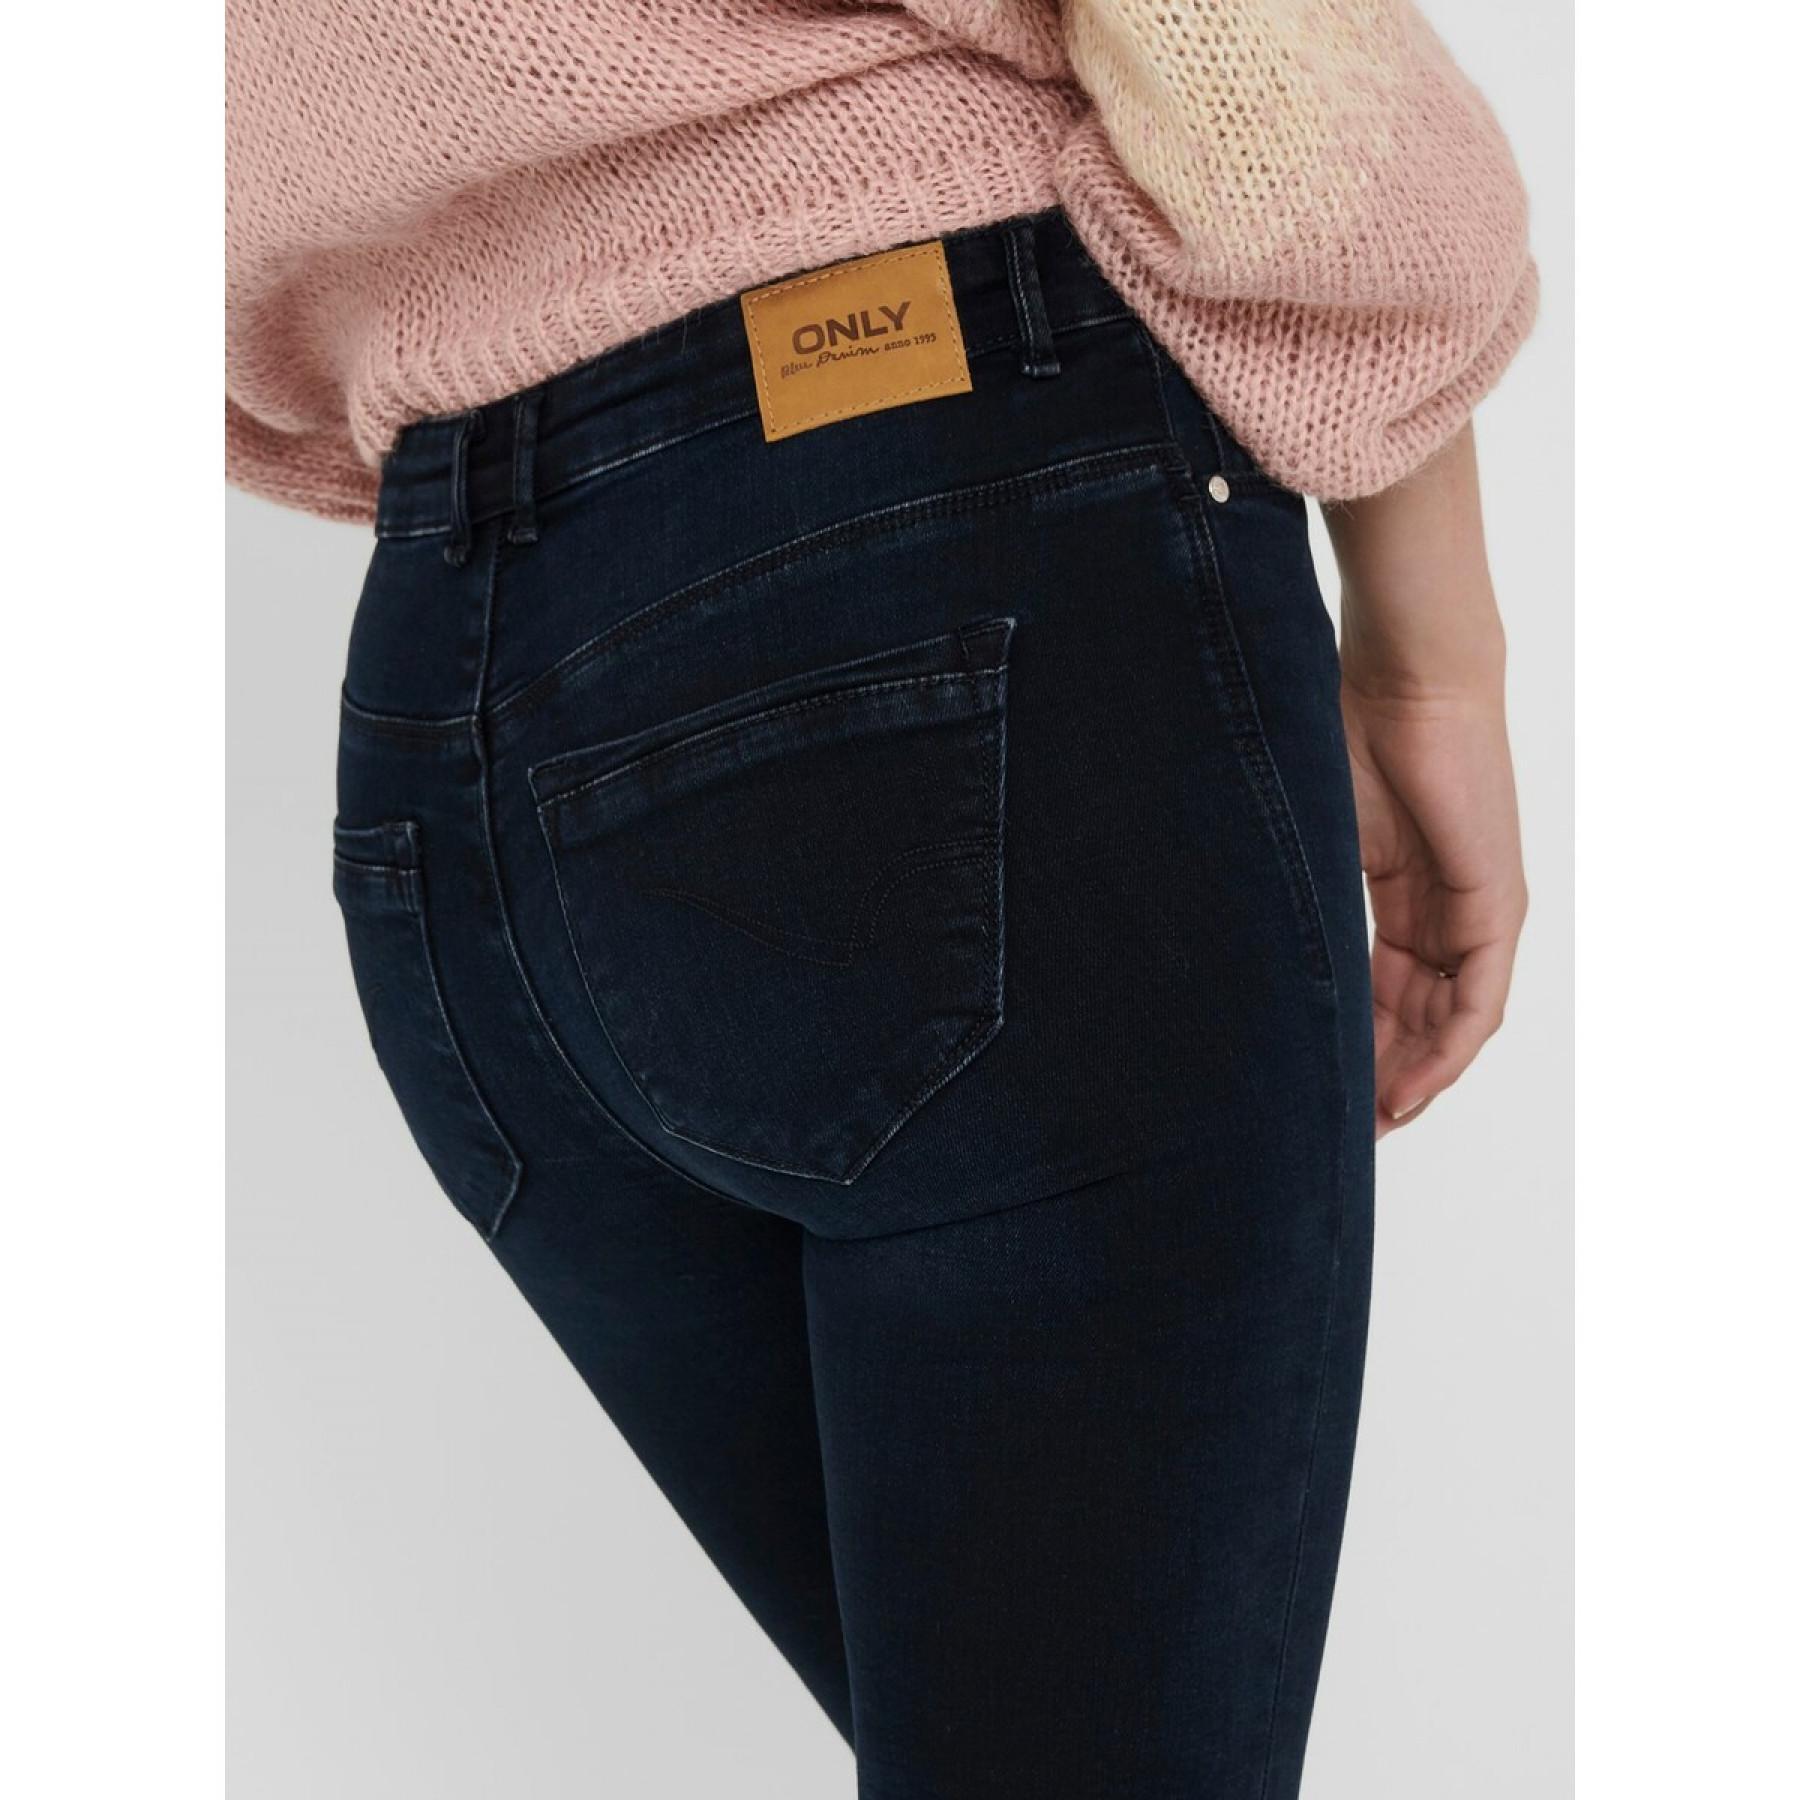 Women's jeans Only Paola life skinny